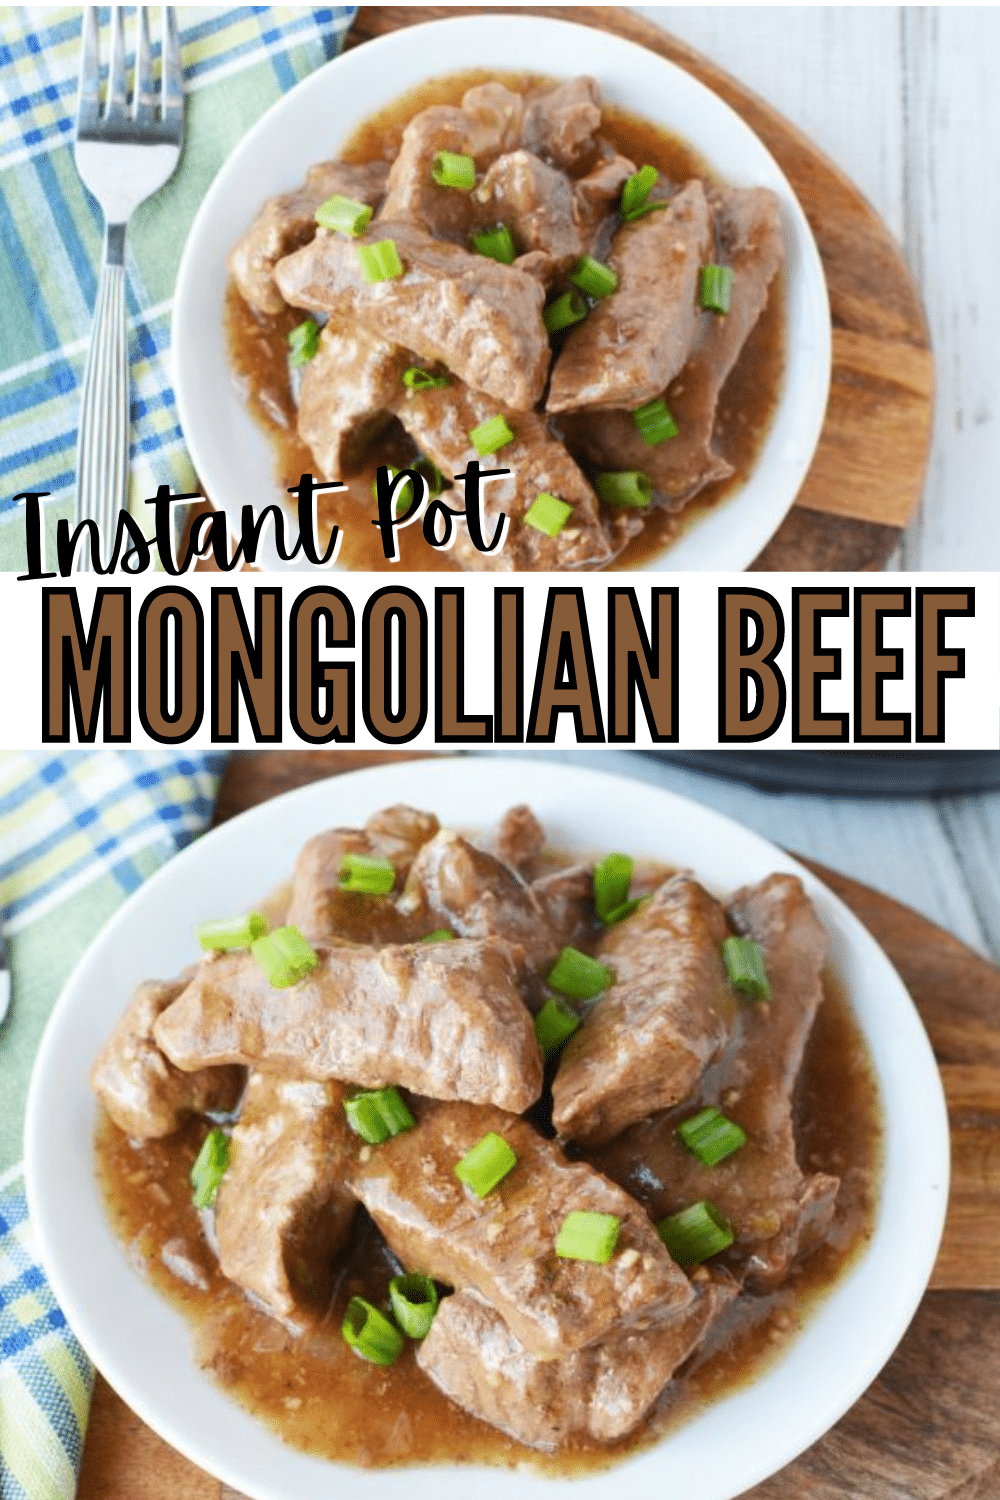 This Instant Pot Mongolian Beef is even better than takeout and so easy to make in your pressure cooker! #instantpot #pressurecooker #mongolianbeef #dinnerrecipe via @wondermomwannab